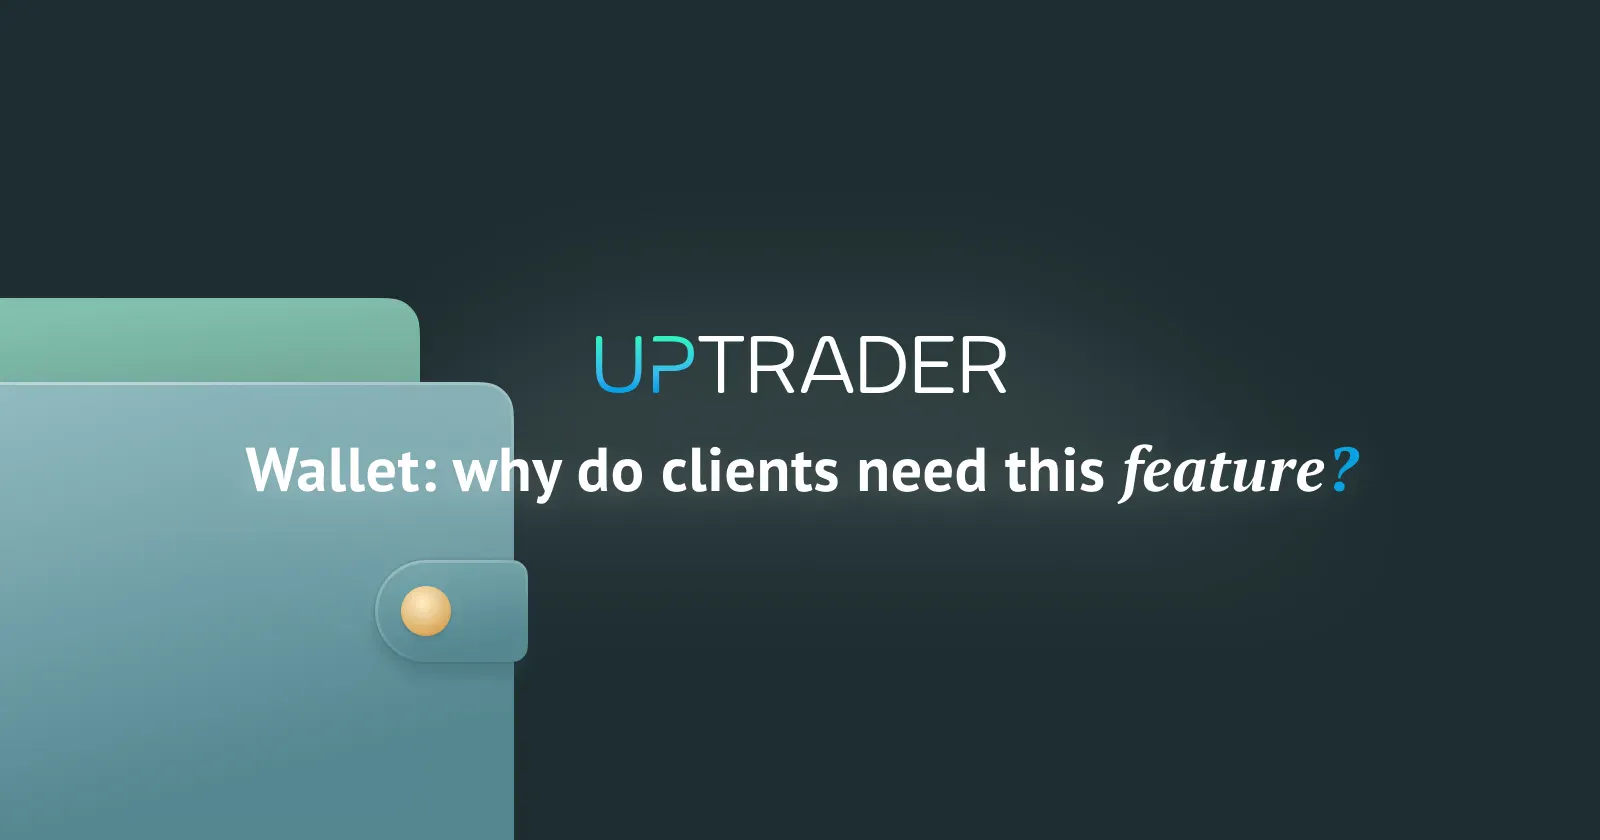 UpTrader Wallet: why do clients need this feature?